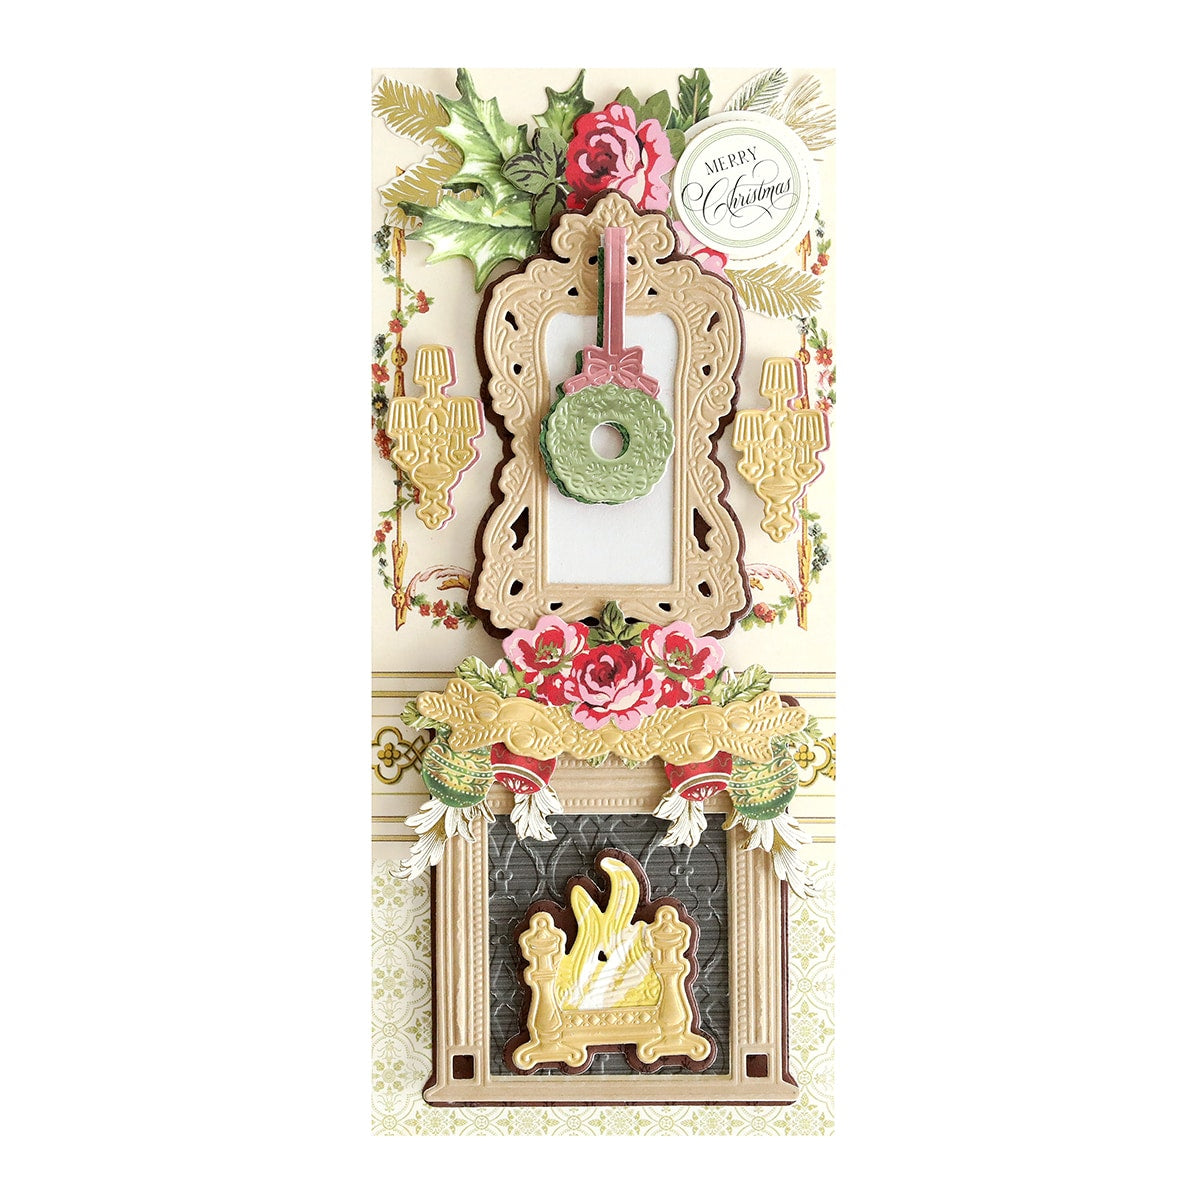 a card with a Slimline 3D Mantel and Fireplace Dies and ornaments on it.